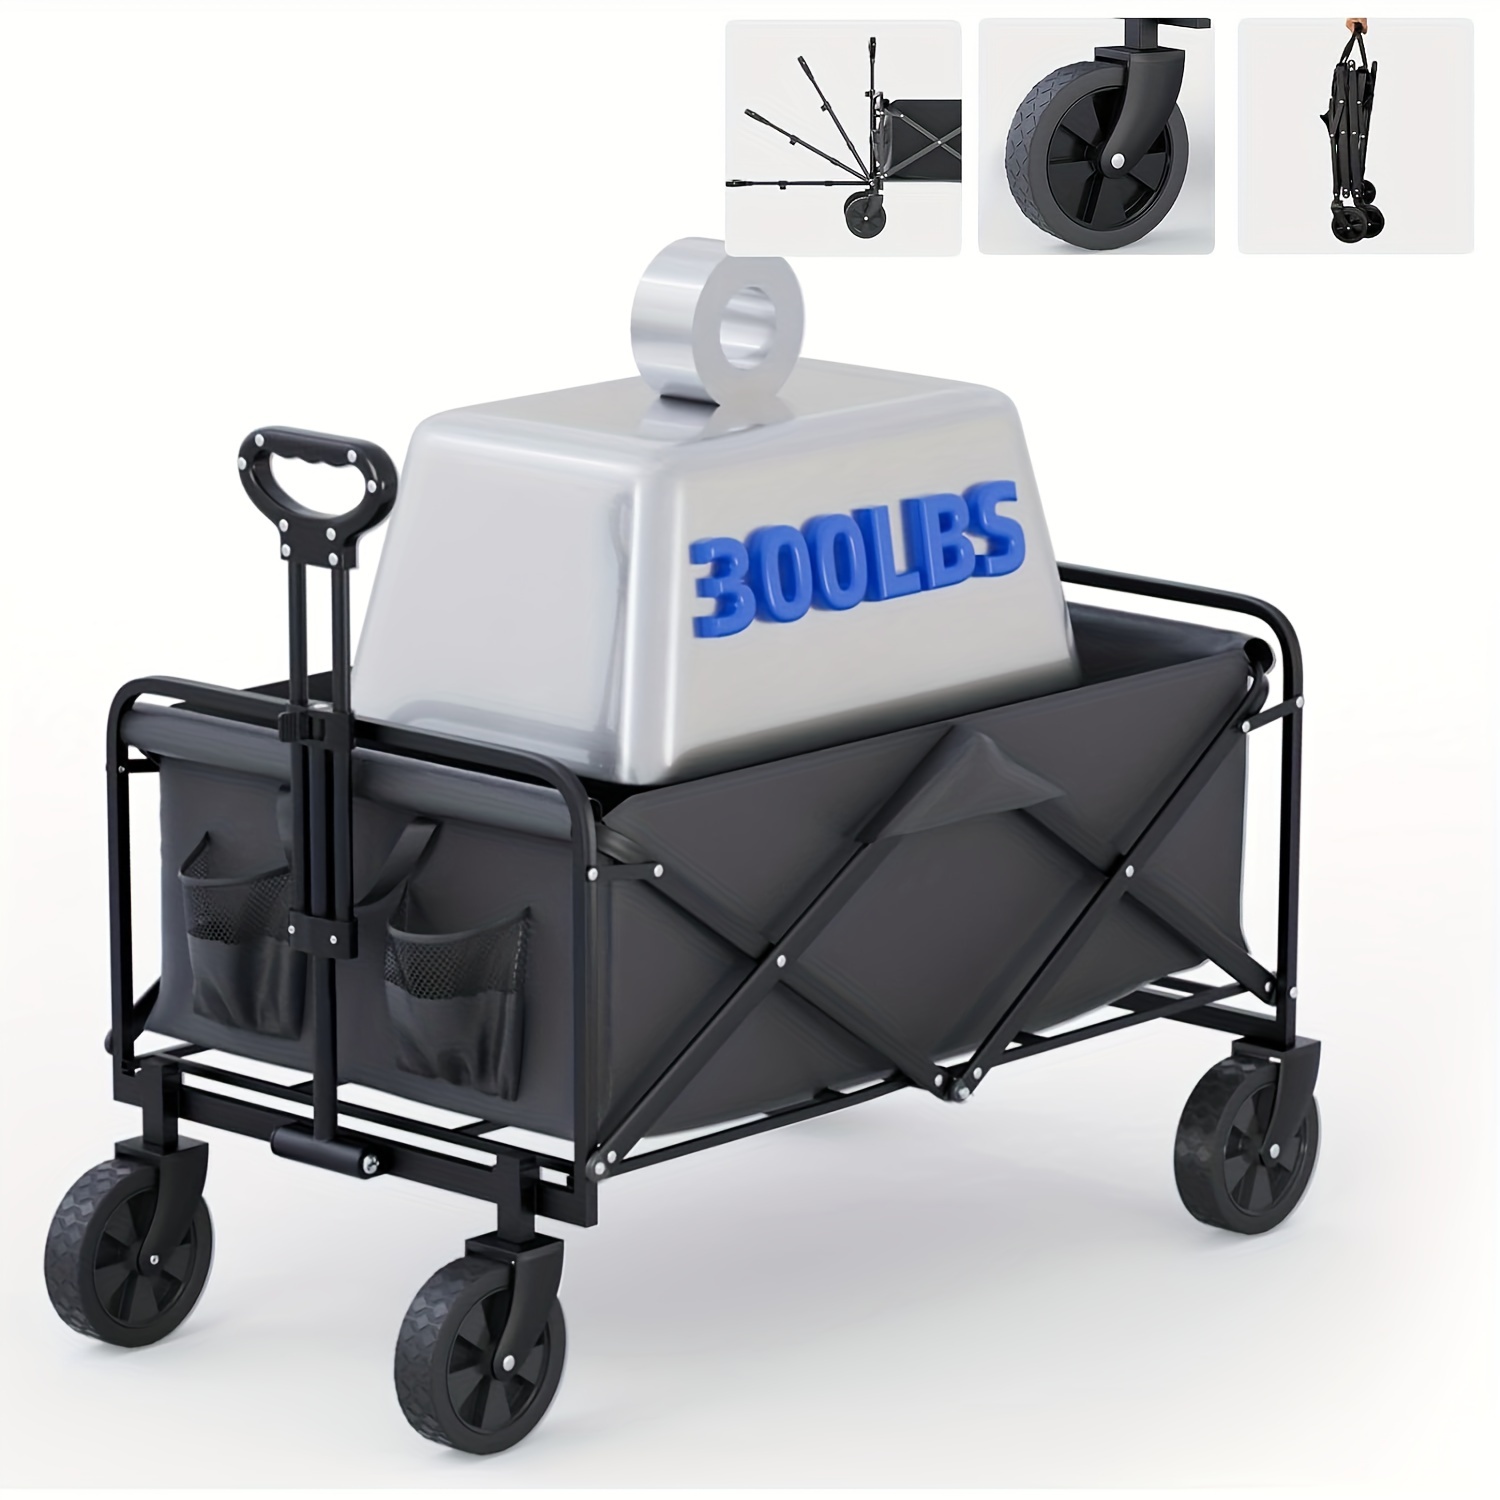 Collapsible Foldable Wagon Cart with All Terrain Solid Wheels, Heavy Duty  Folding Utility Grocery Wagon with 300lbs Weight Capacity Portable Garden